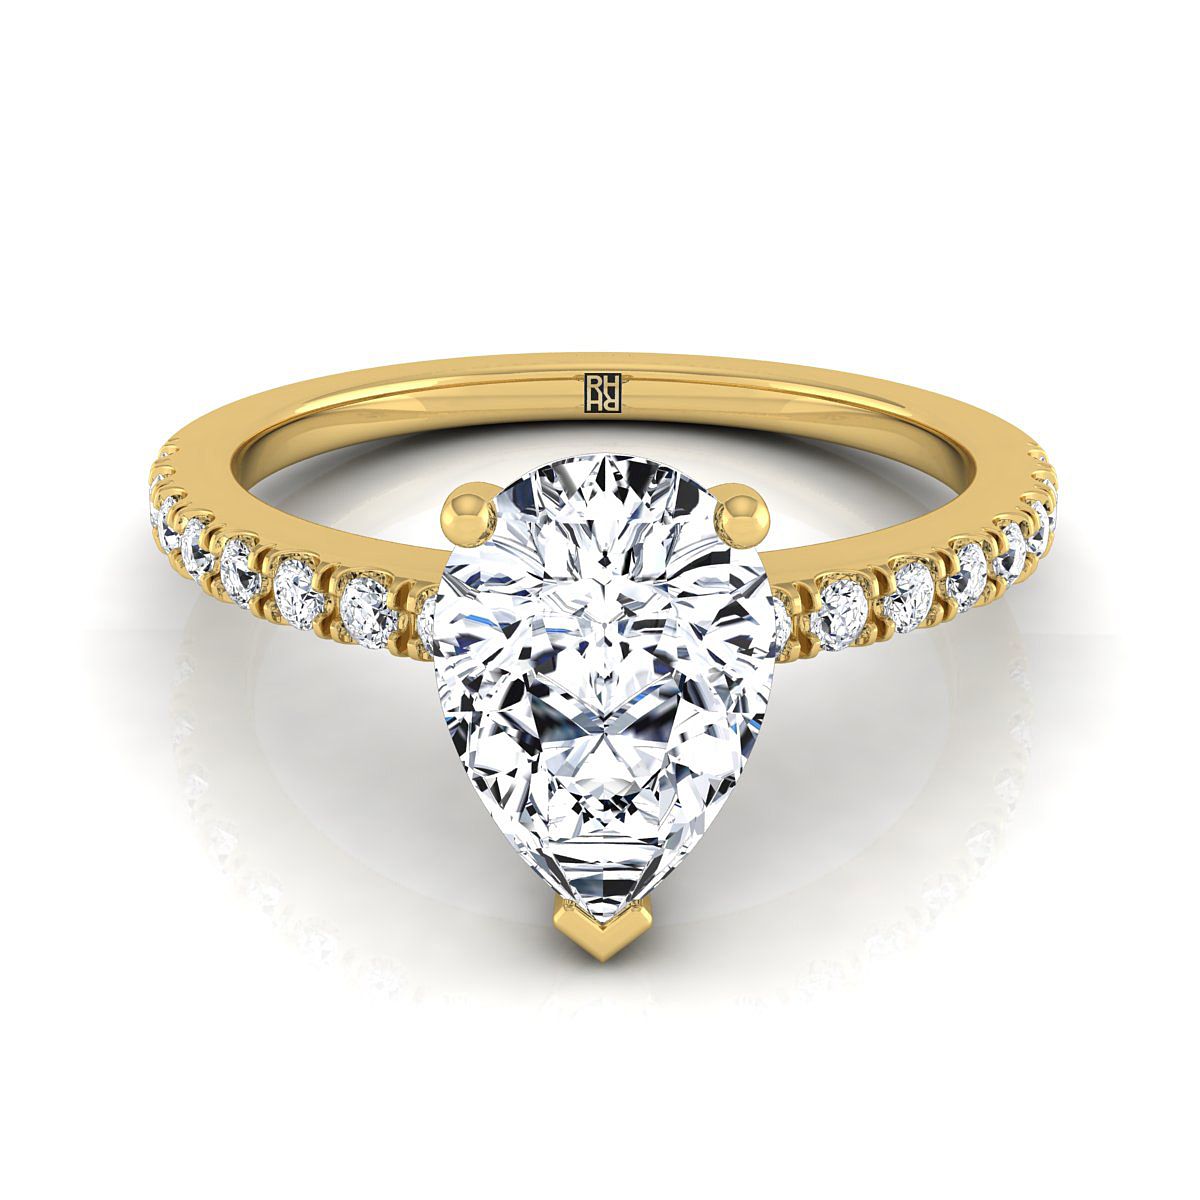 14K Yellow Gold Pear Shape Center Simple Linear Diamond Pave Engagement Ring -1/5ctw